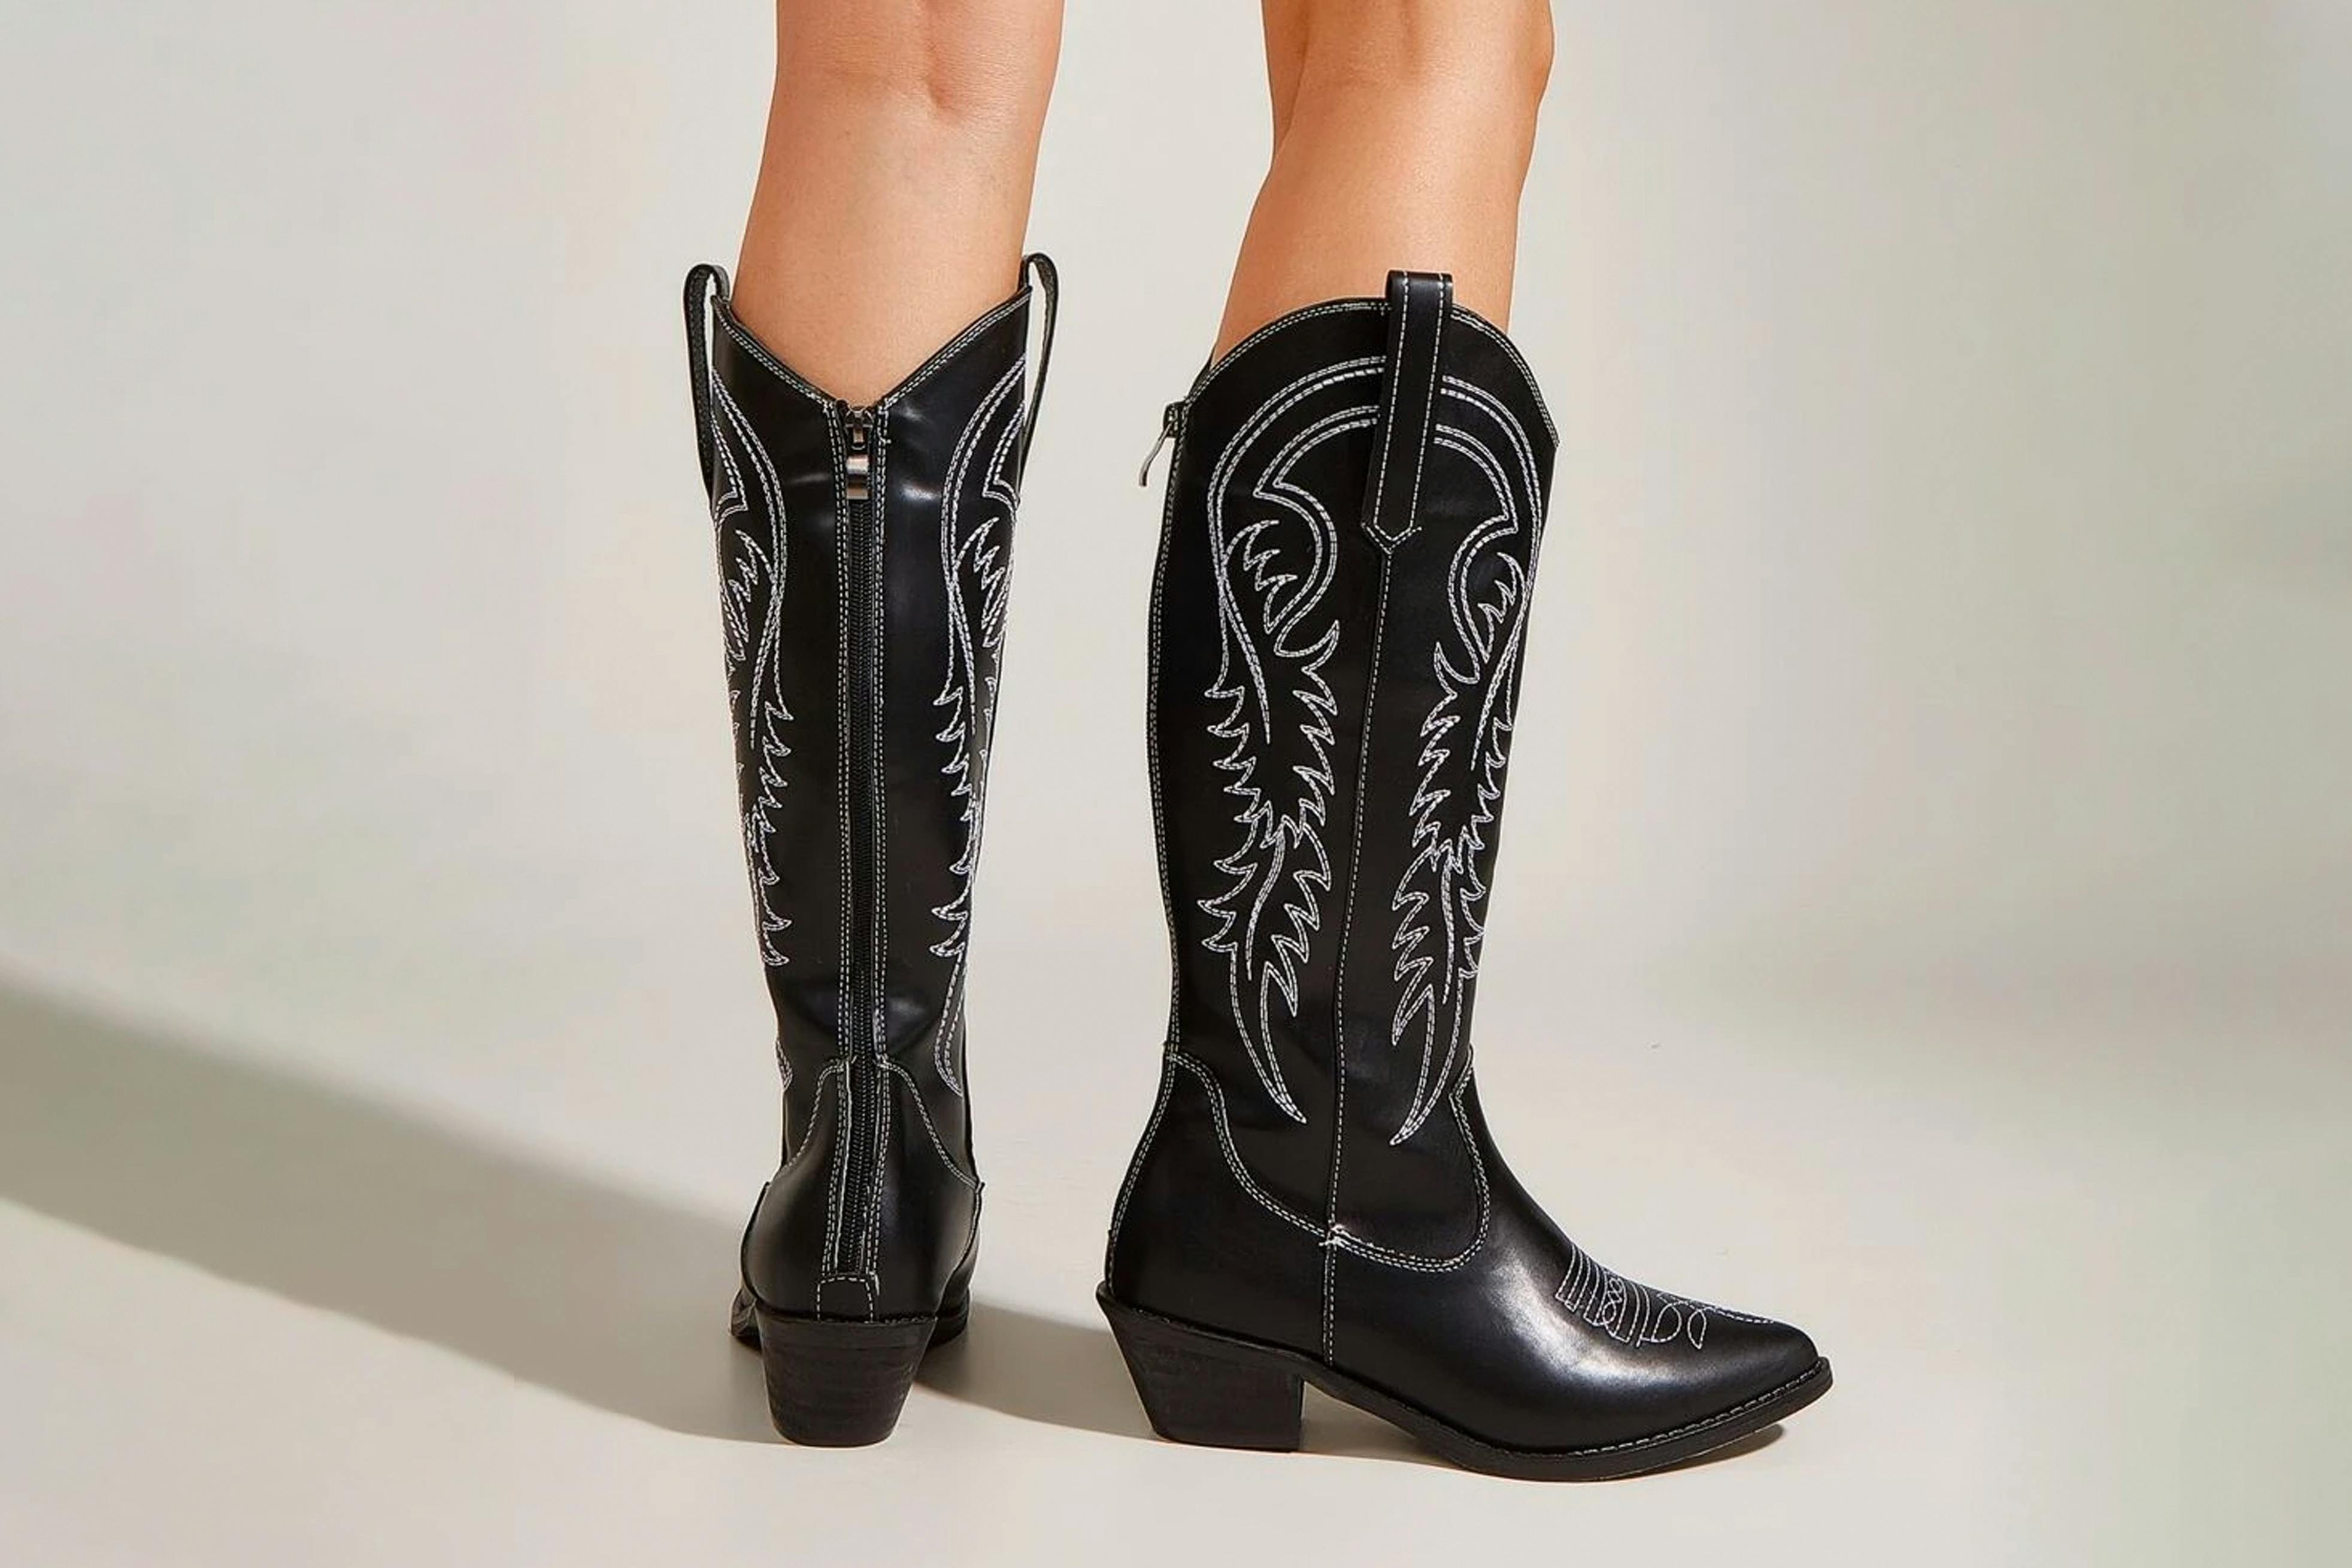 Round 'em Up: We Found 10 Cheap Cowgirl Boots for Under $75